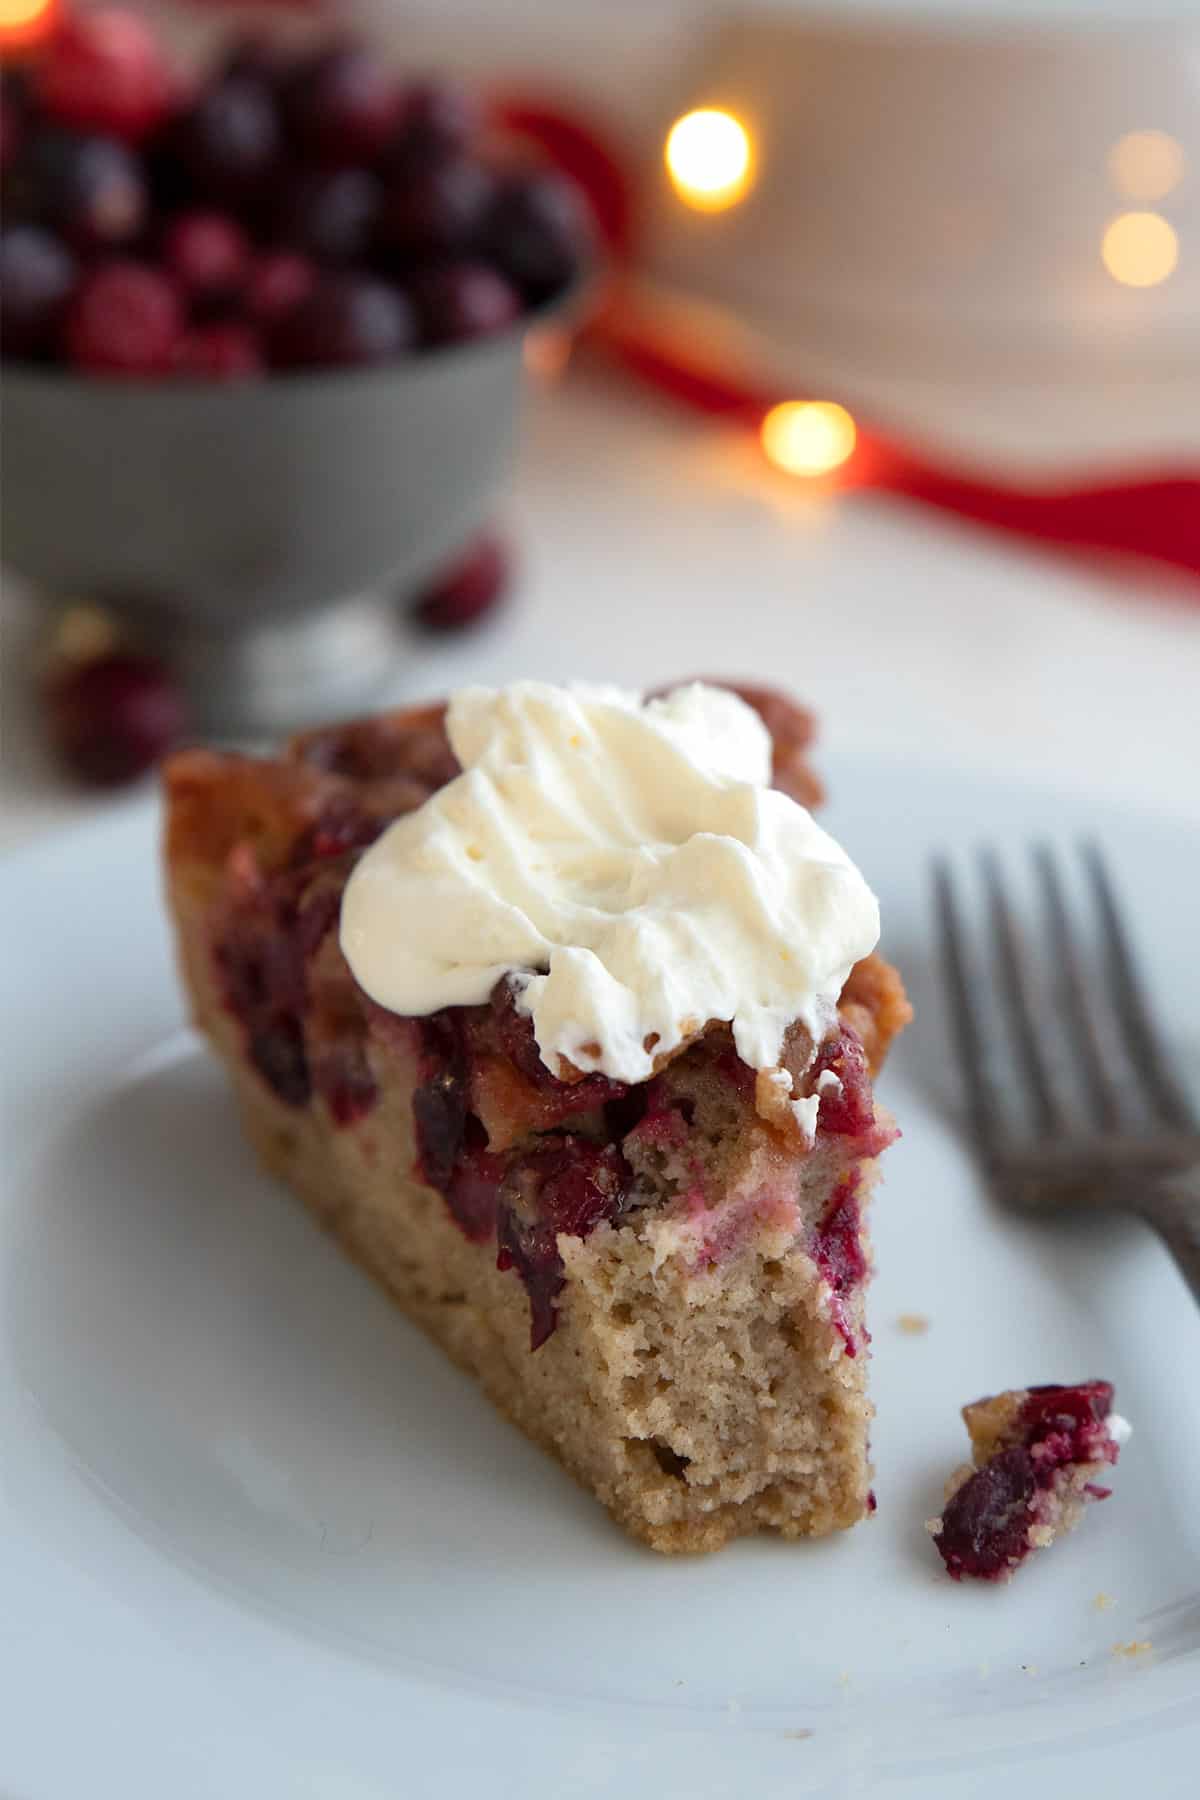 A slice of Keto Cranberry Upside Down Cake with whipped cream on top.